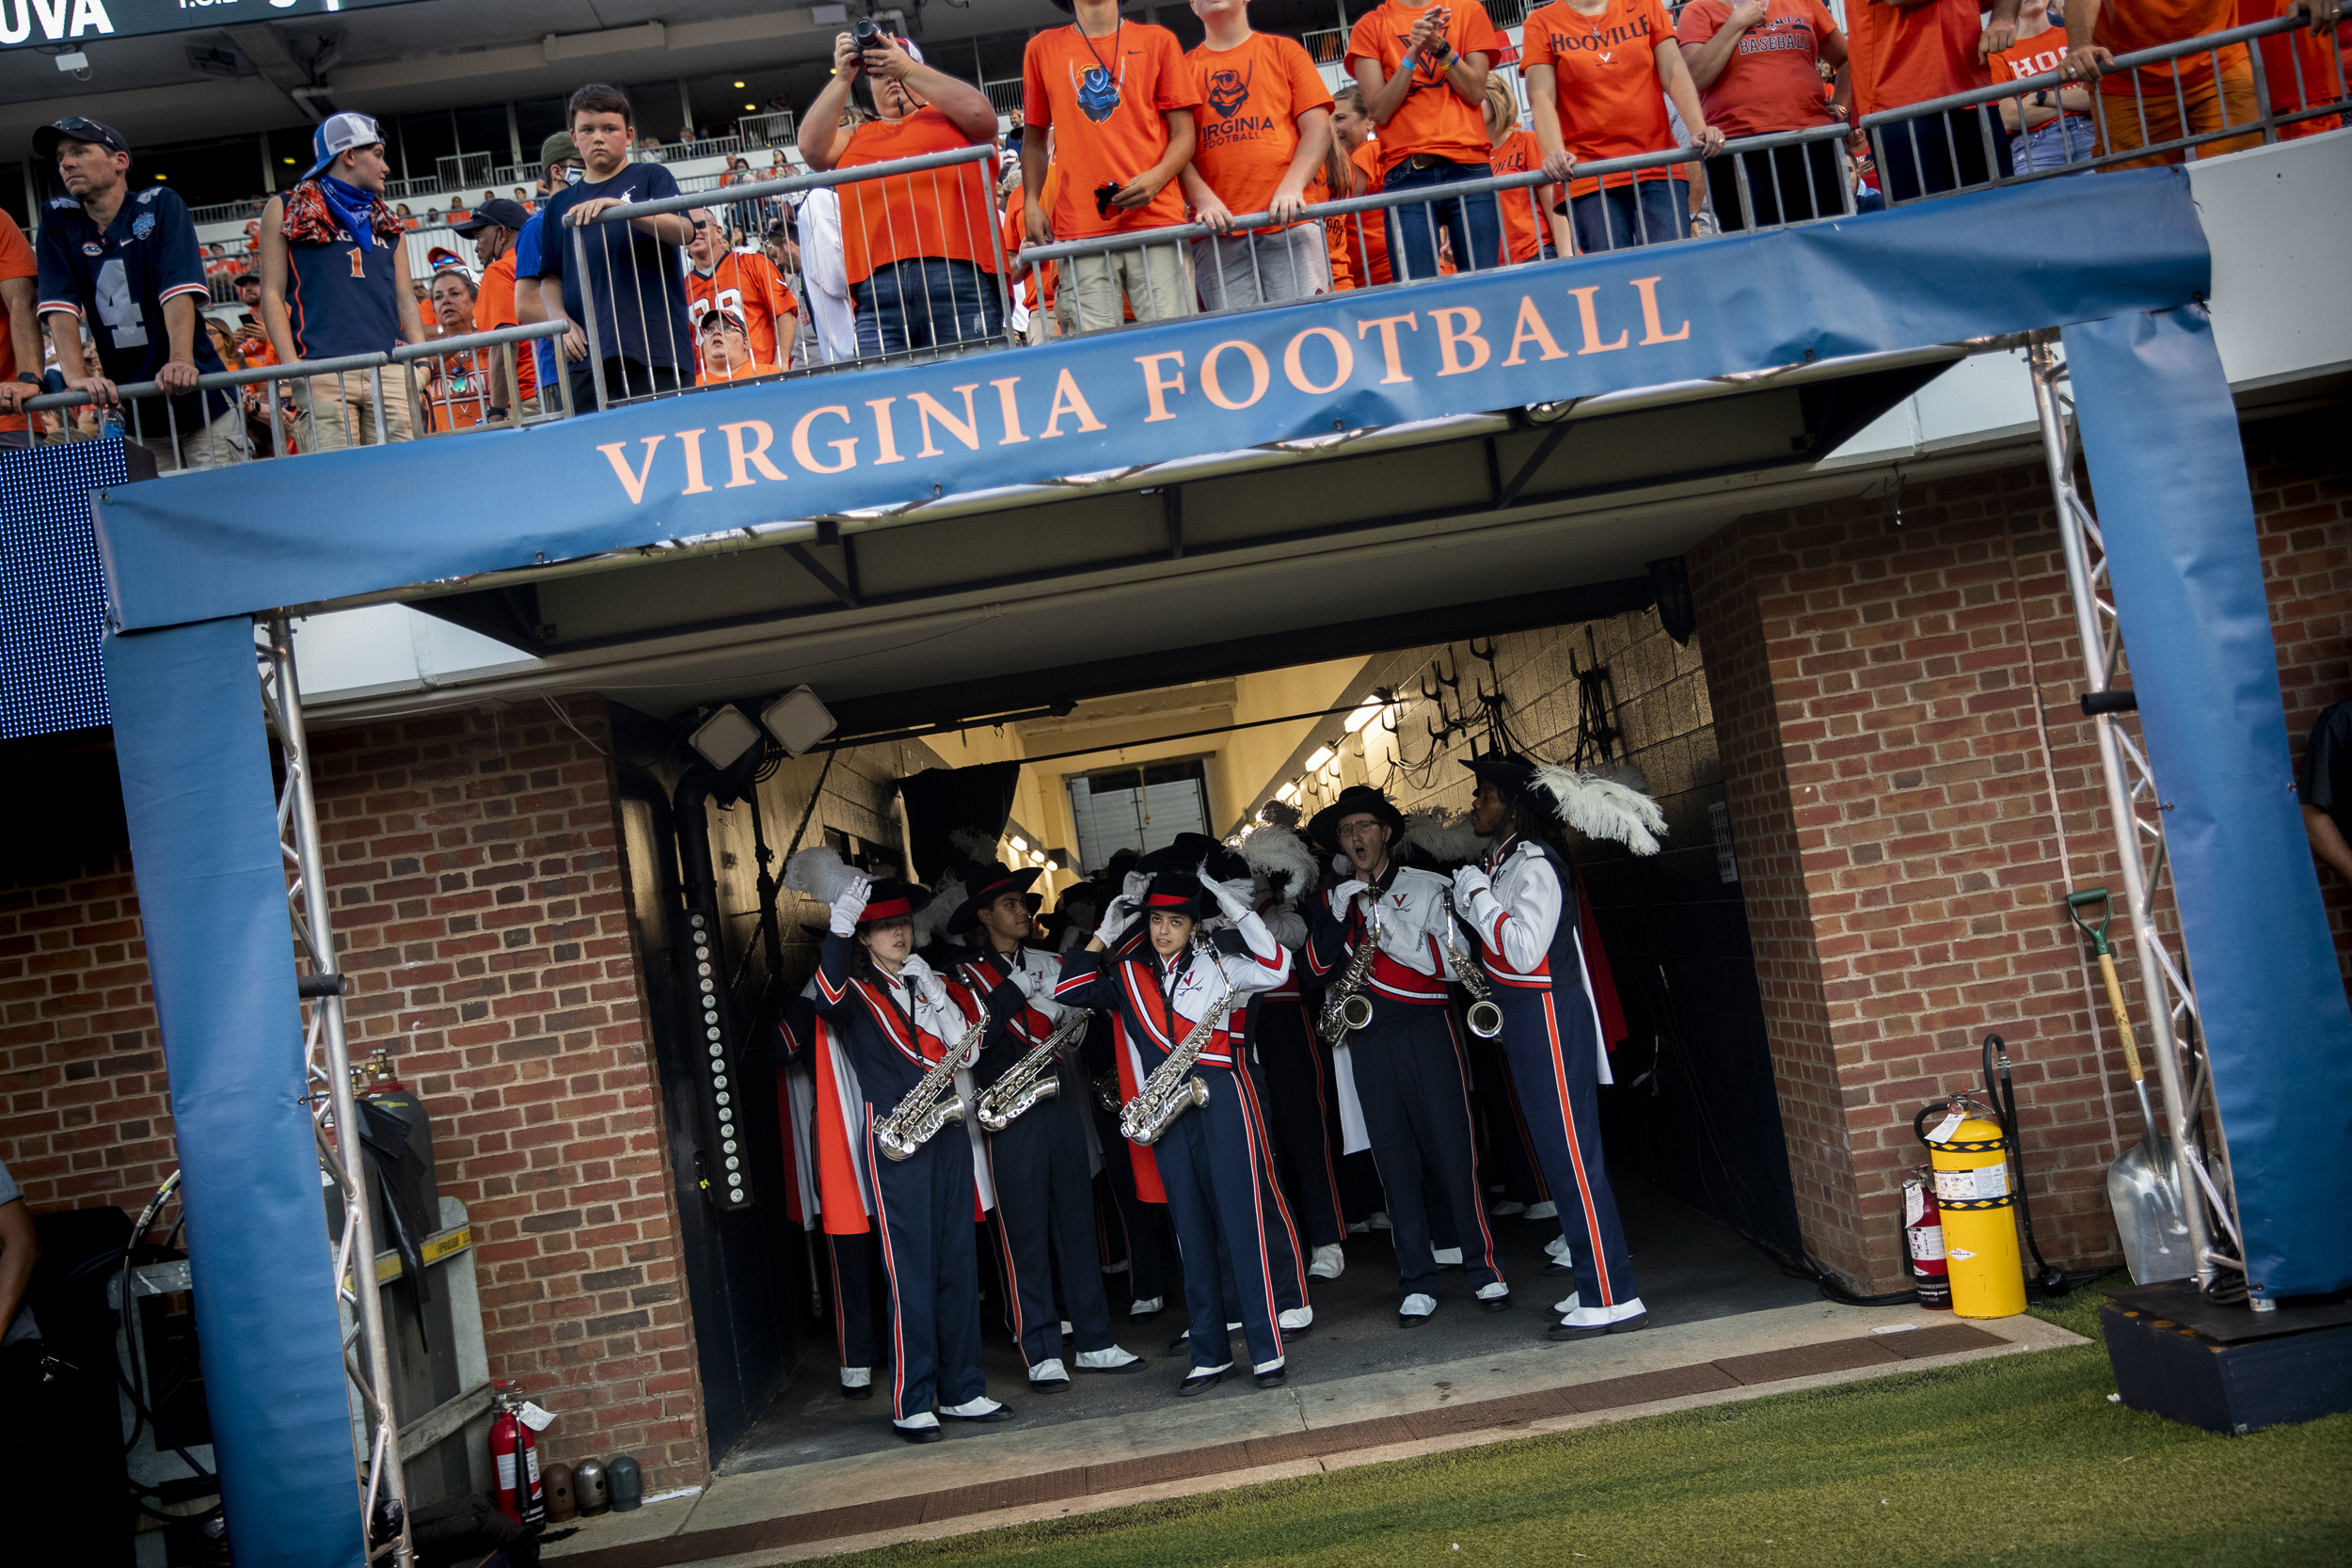 UVA marching band preparing to enter the field